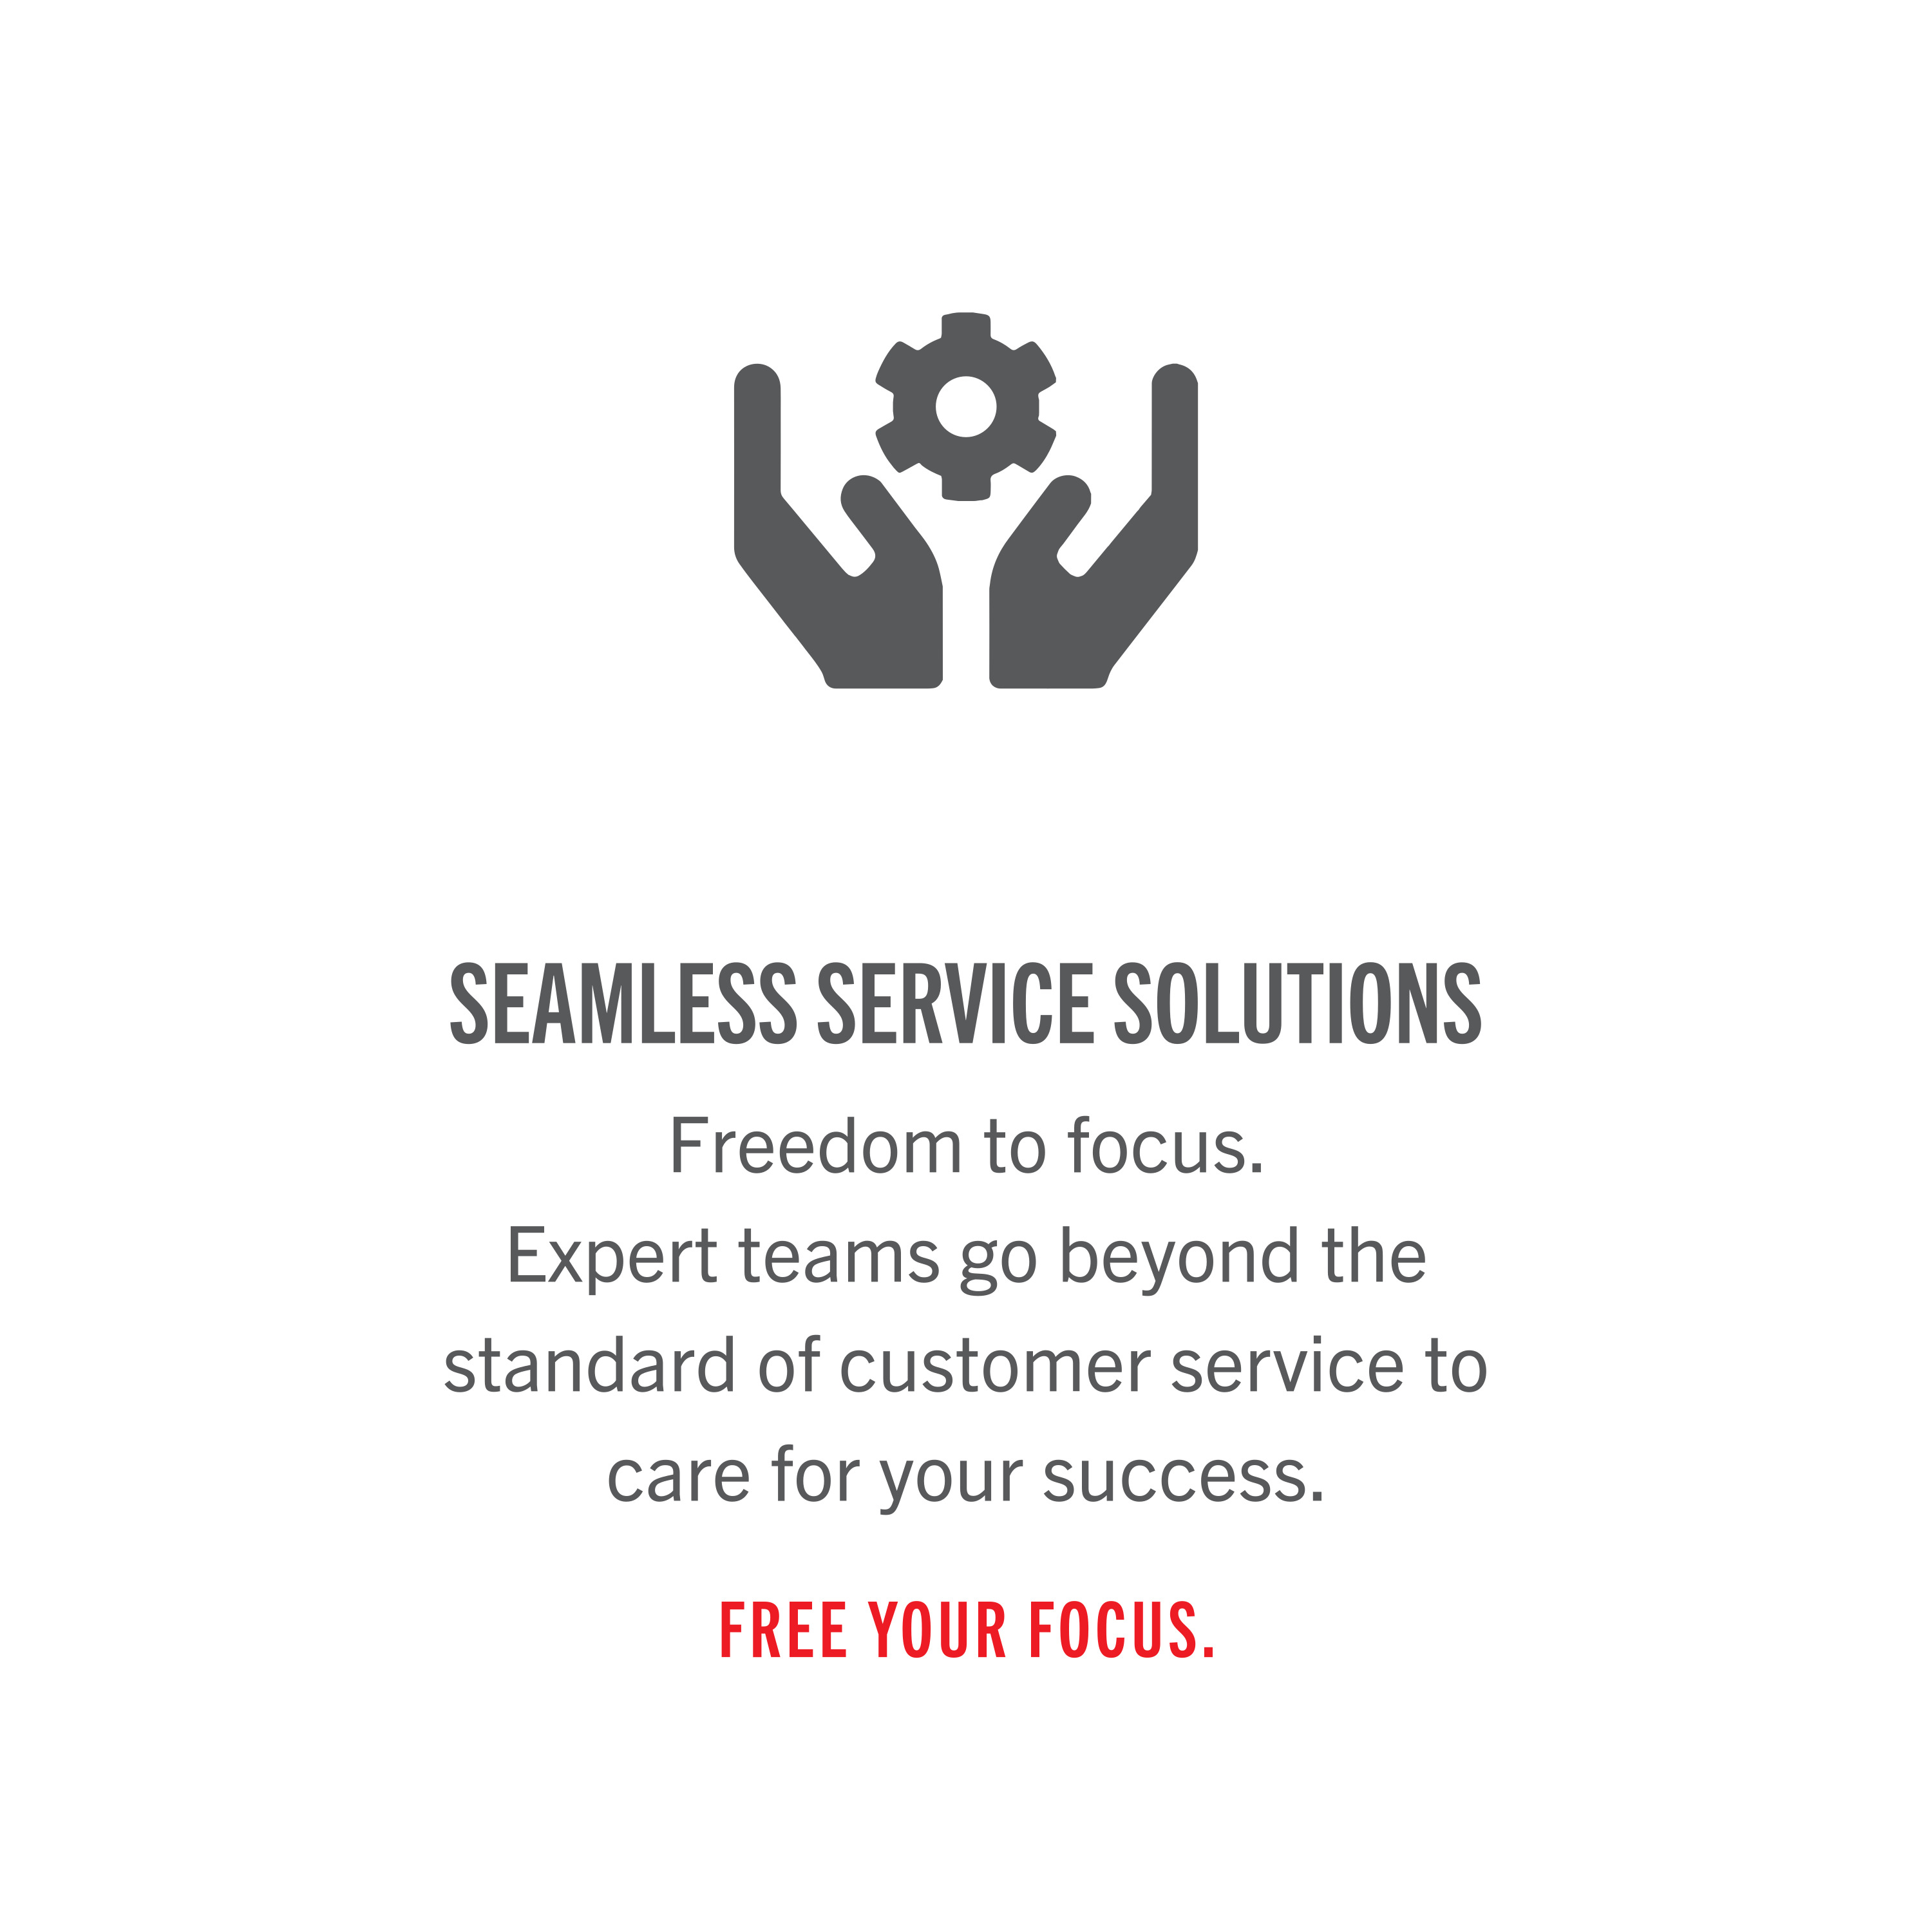 Seamless Service Solutions Graphic